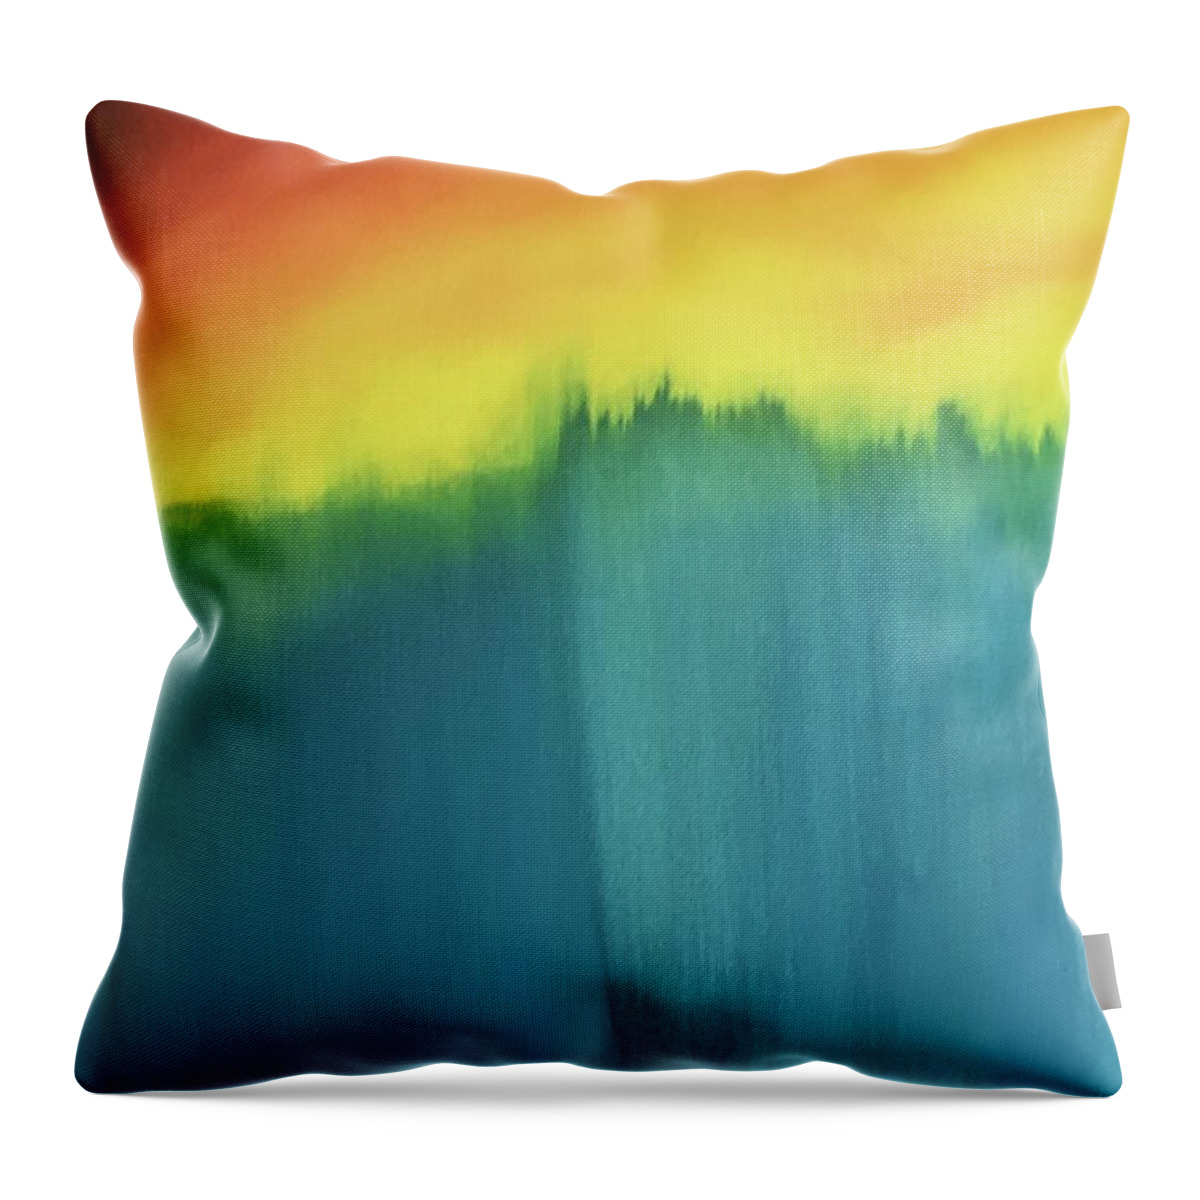 Oil Abstract Throw Pillow featuring the painting Deep Feelings by Michael Silbaugh